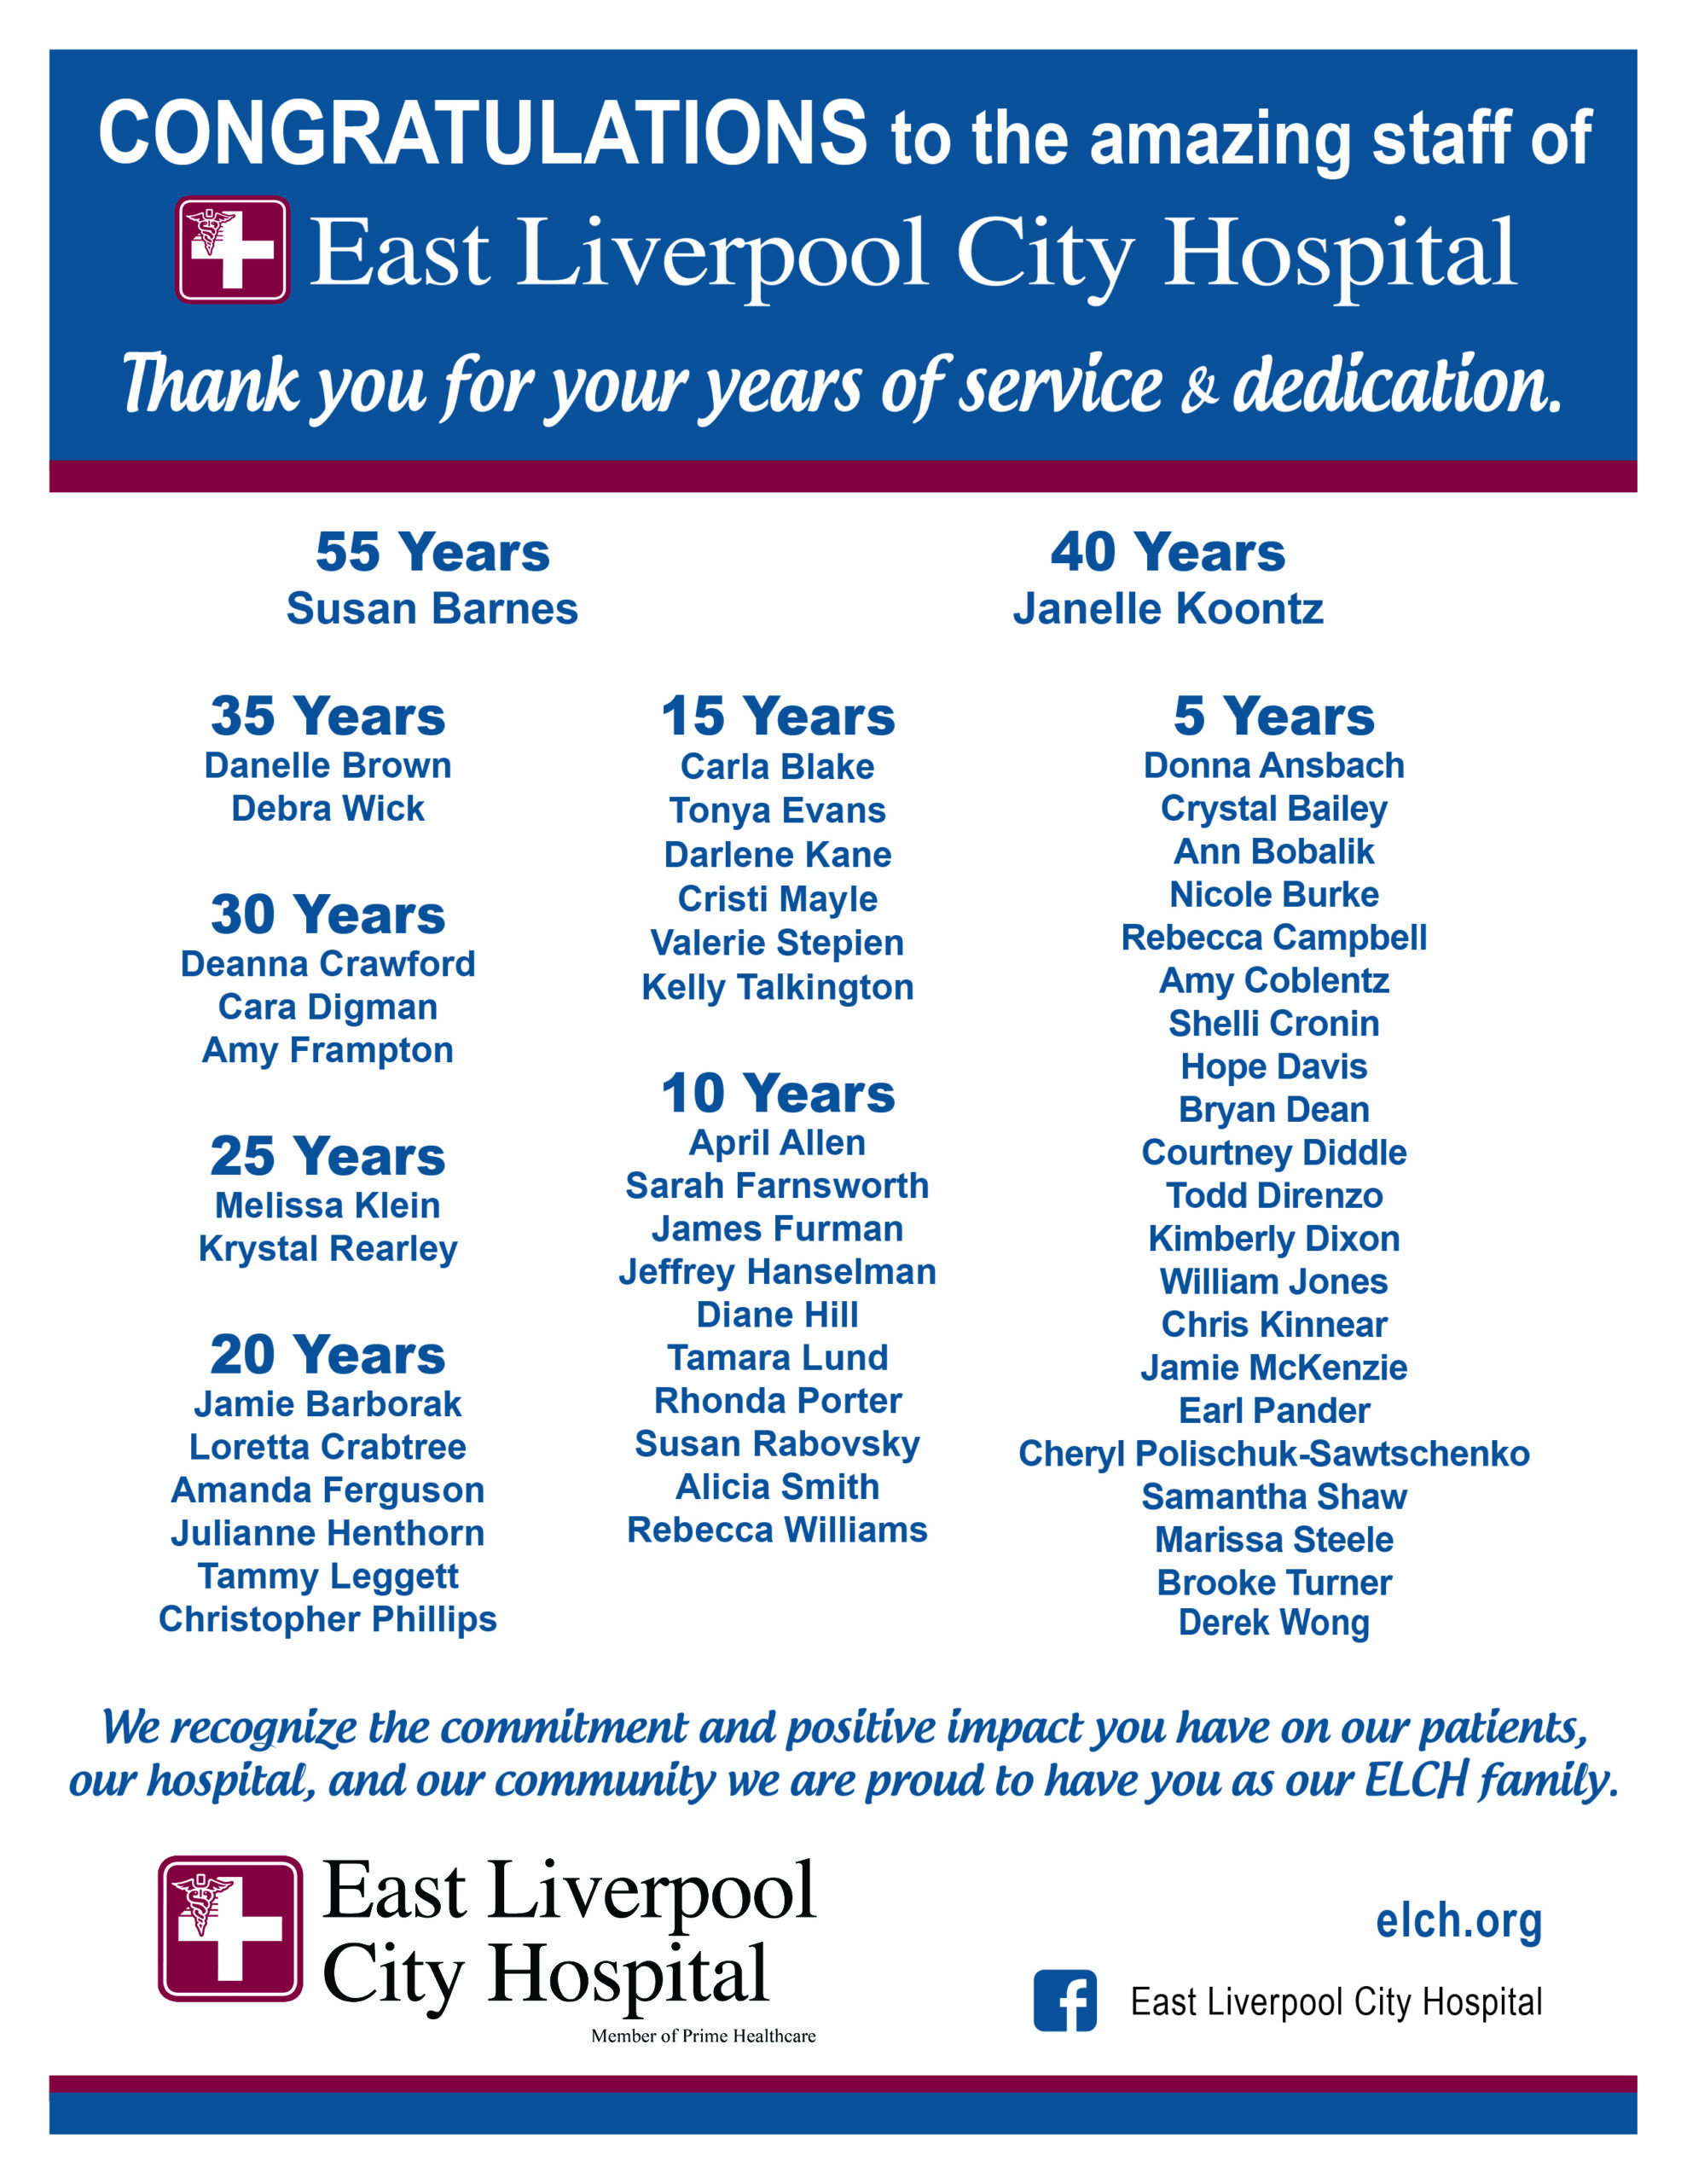 Congratulations Years of Service - East Liverpool City Hospital